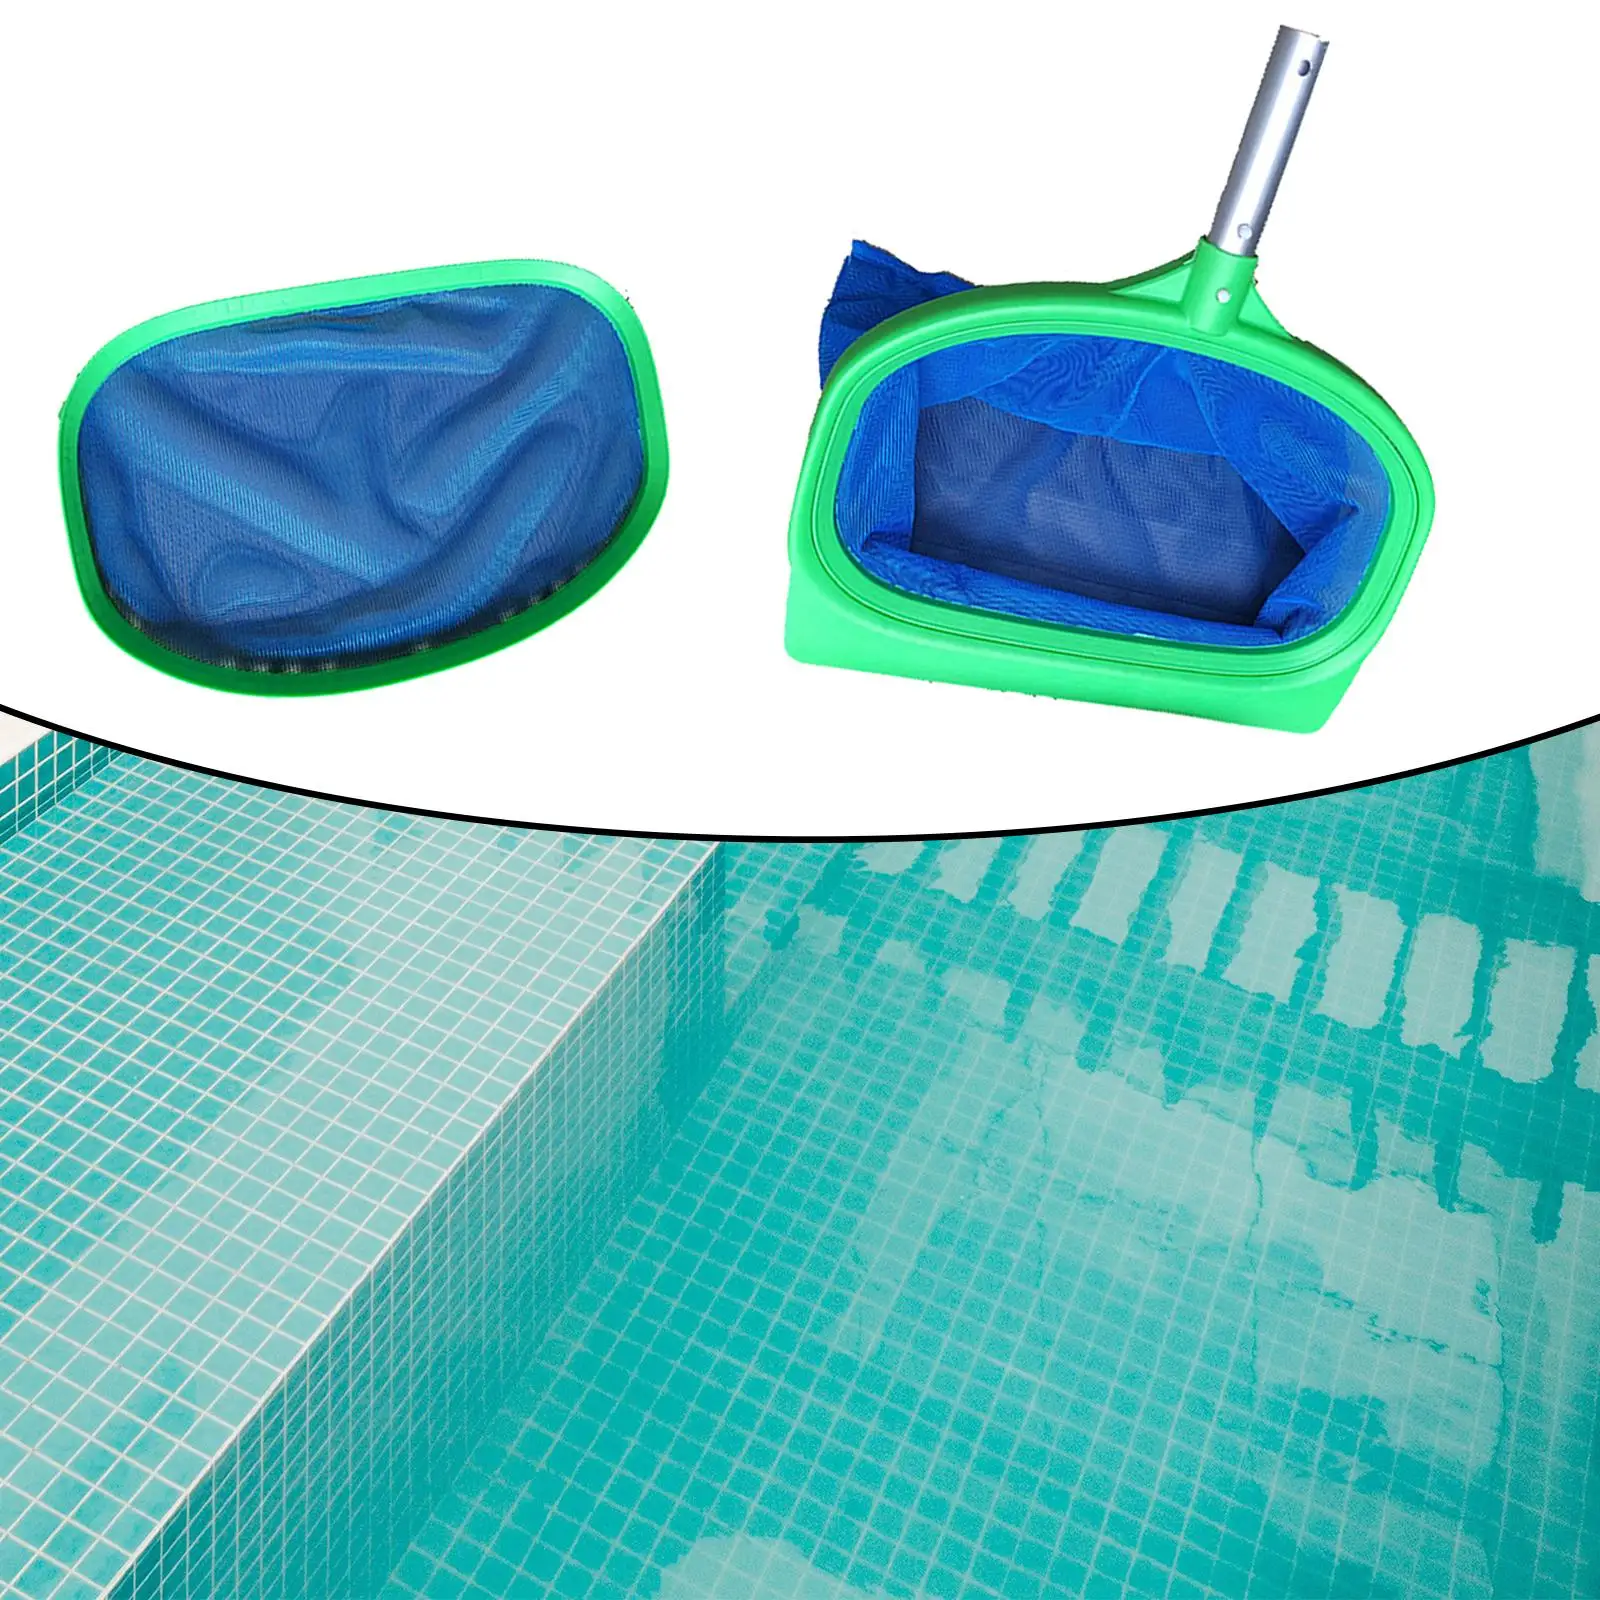 Pool Leaf Skimmer Net Removable Debris Pickup Removal Large Opening Net with Shallow Net for Garden Aquariums Pond SPA Hot Tub